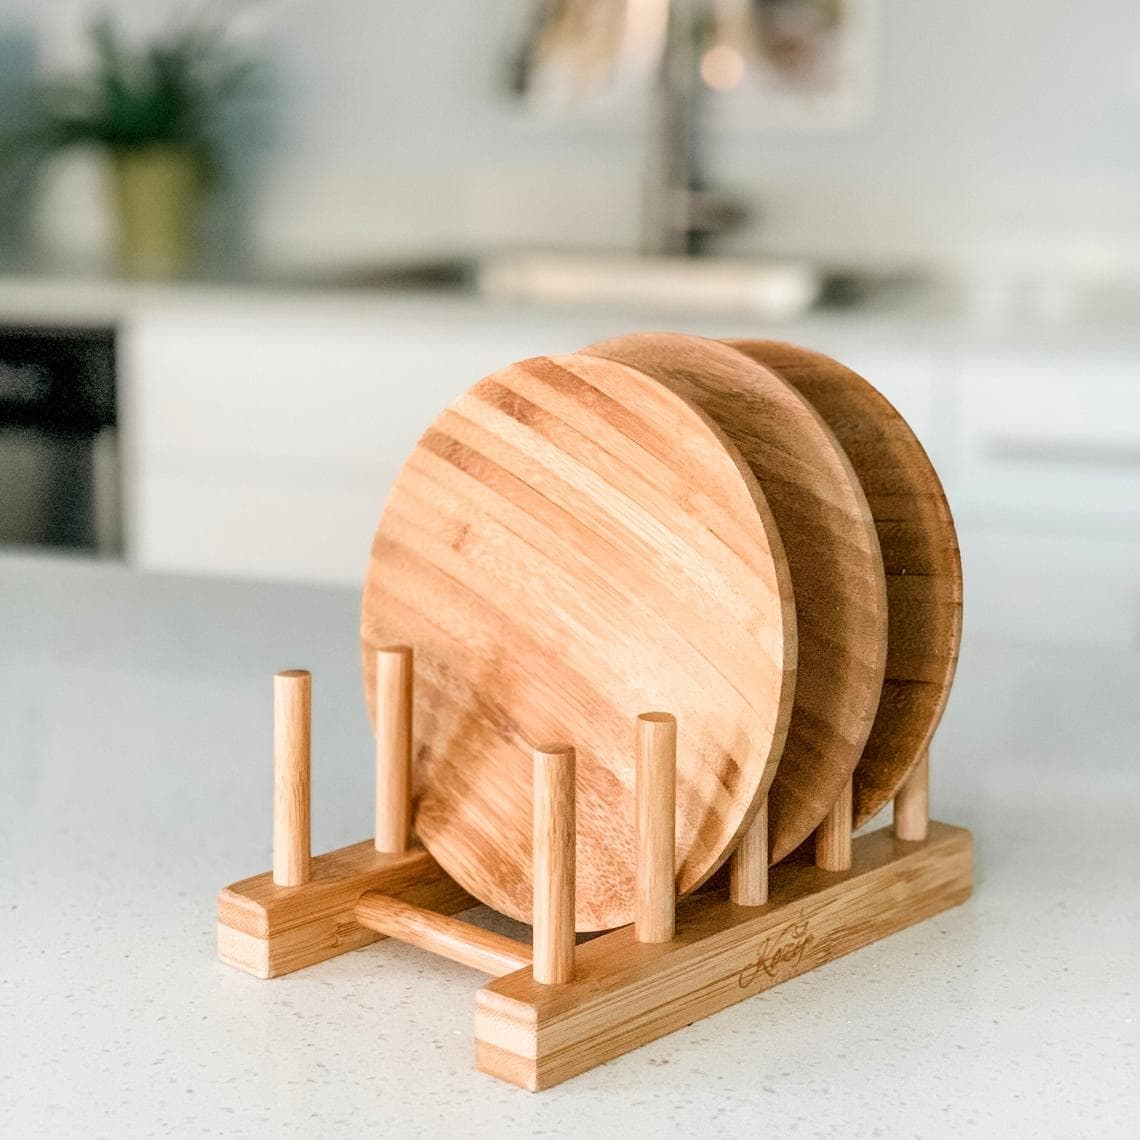 https://ak1.ostkcdn.com/images/products/is/images/direct/9dd90575c91ab7dcf5de42efeed78c5e214eb9a1/Bamboo-Dish-Rack-Plates-Holder-Kitchen-Storage-Cabinet-Organizer.jpg